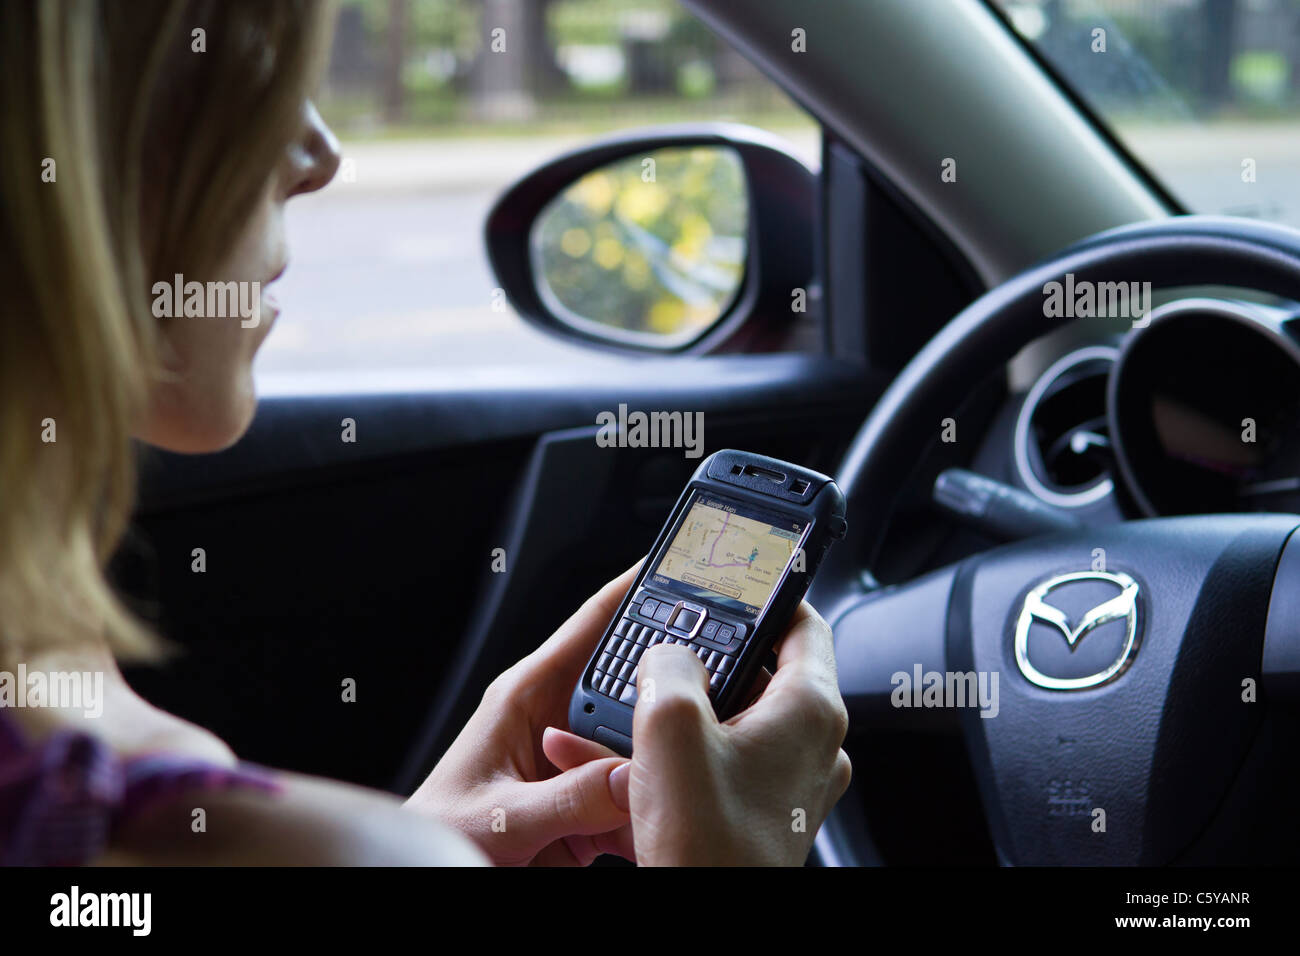 Woman in car using phone GPS to find driving directions Stock Photo